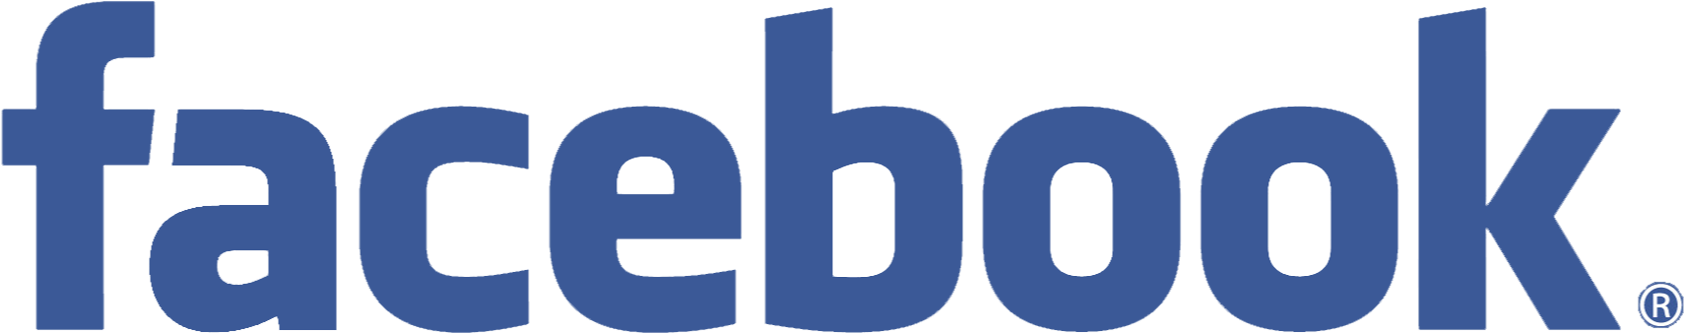 Join Us On Facebook - Facebook Word Logo Png (3032x600)